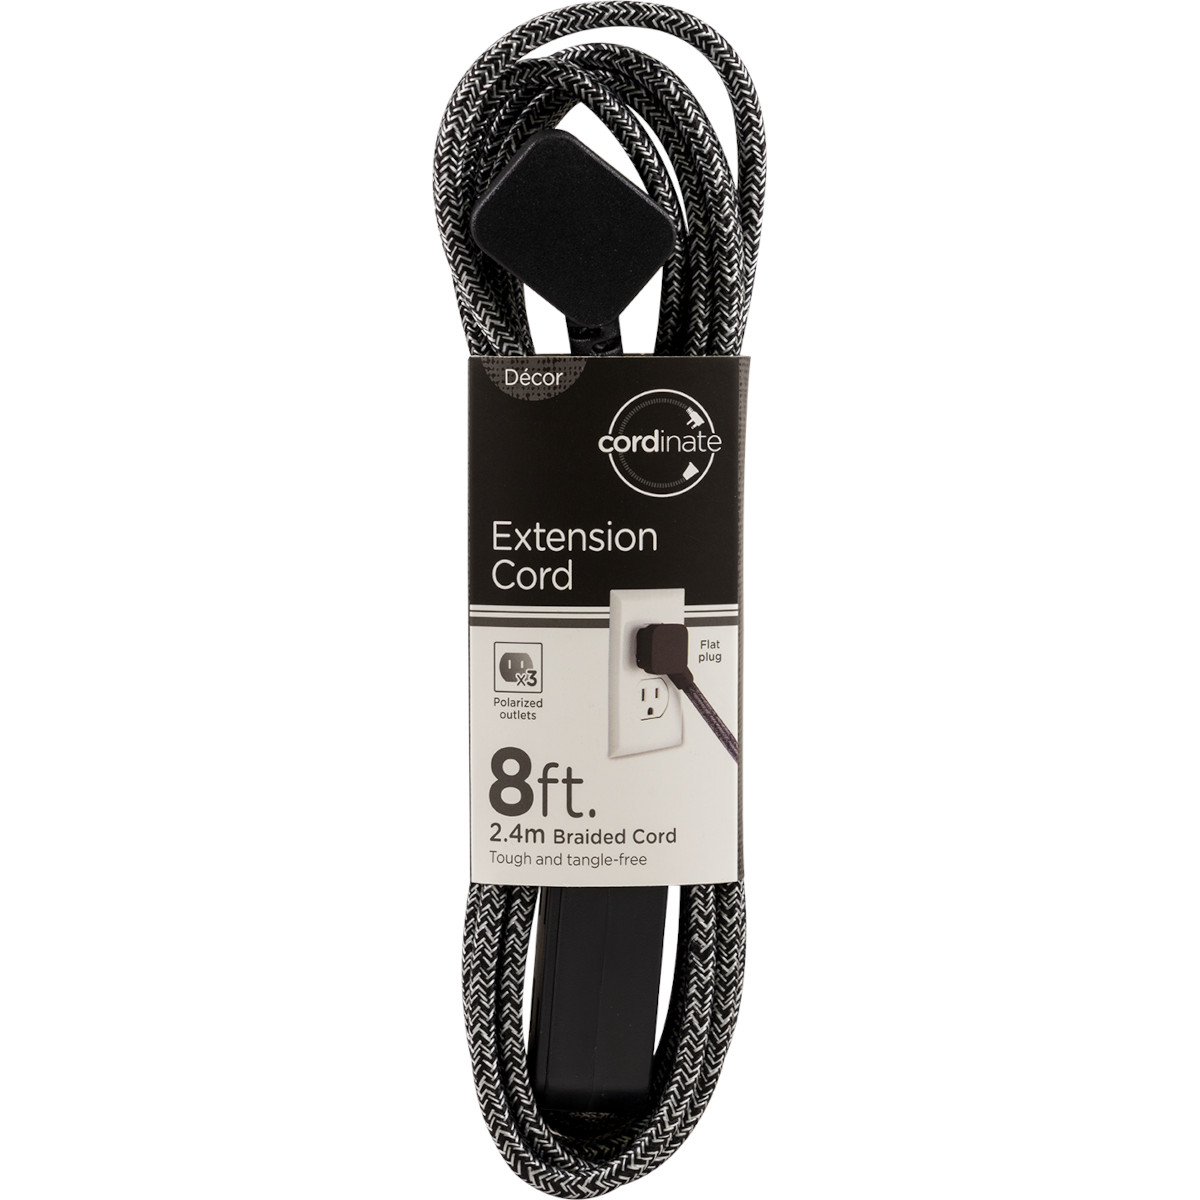 3 Outlet 8 foot Braided Extension Cord